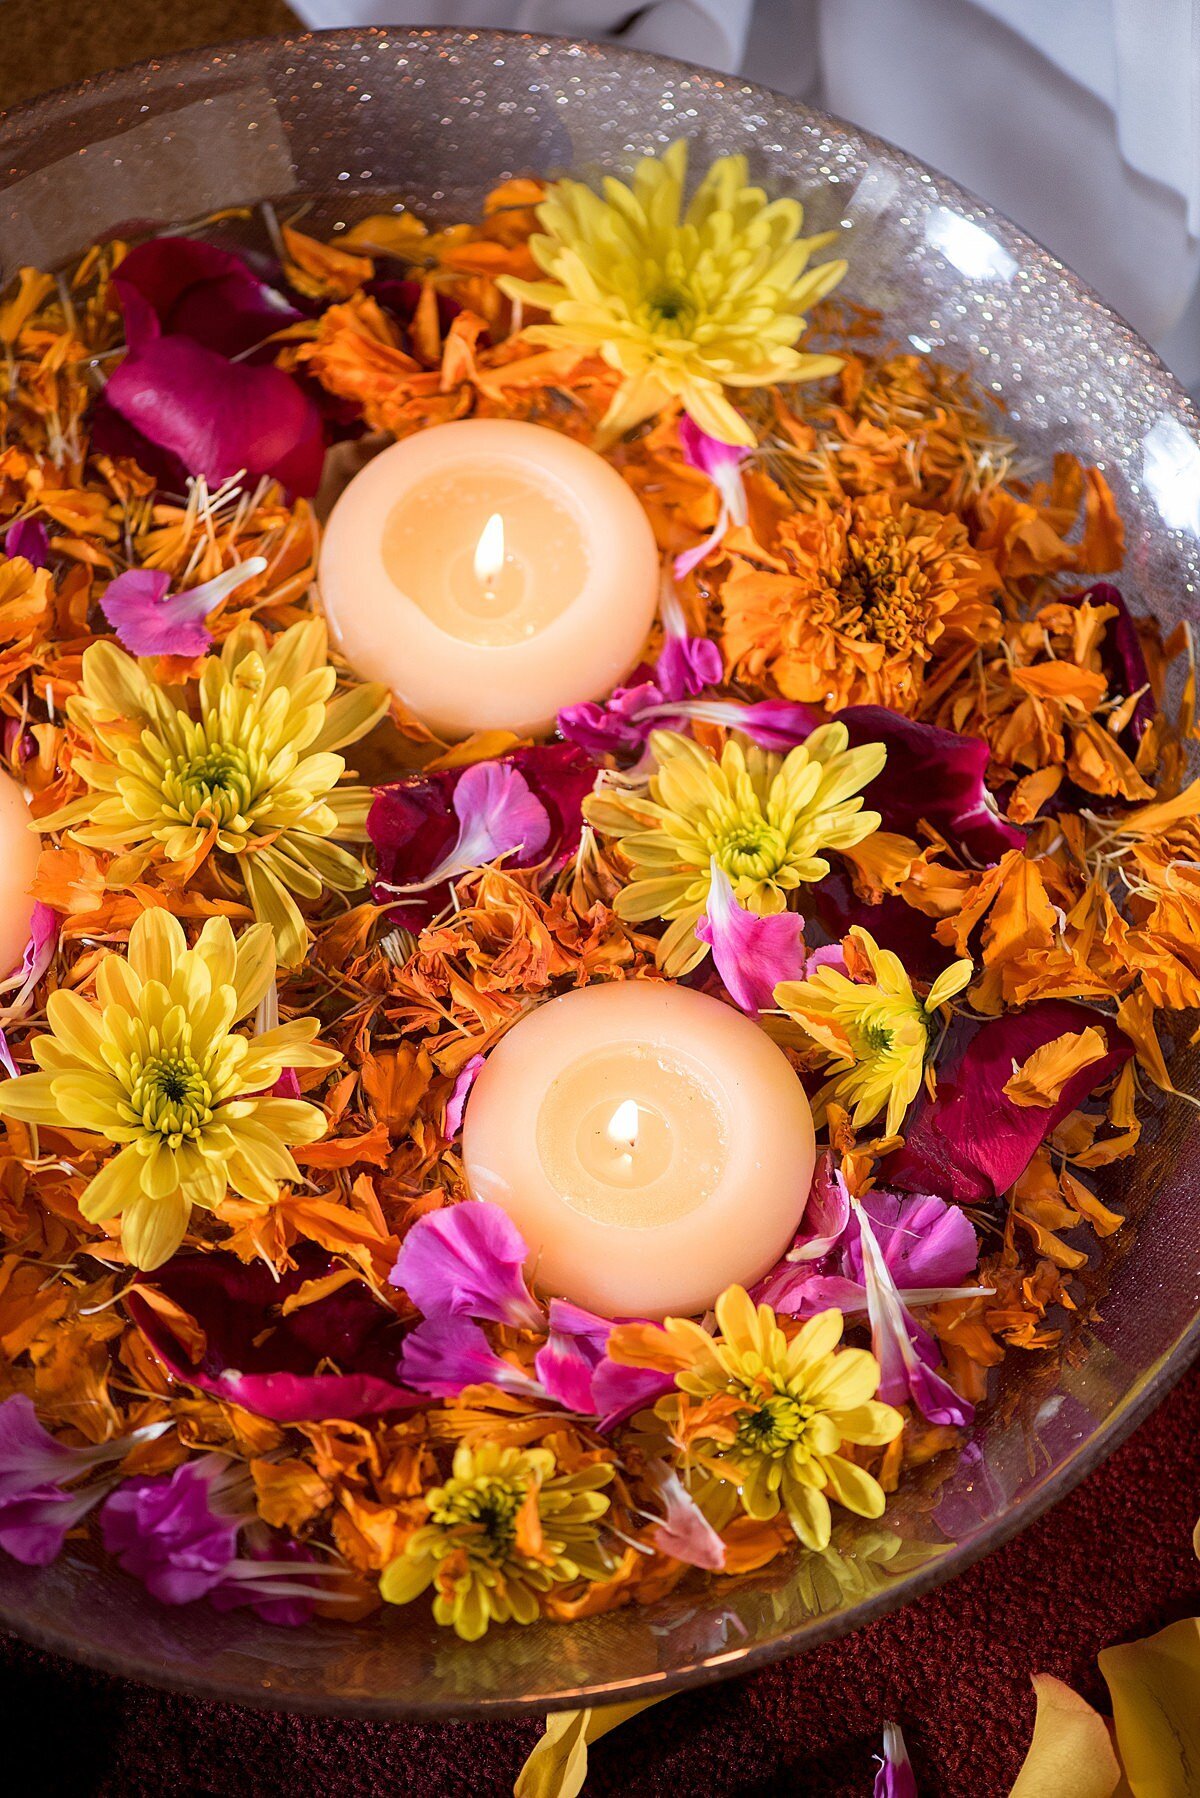 Large glass bowl of water filled with floating candles, pink, yellow and orange flowers for a Hindu wedding